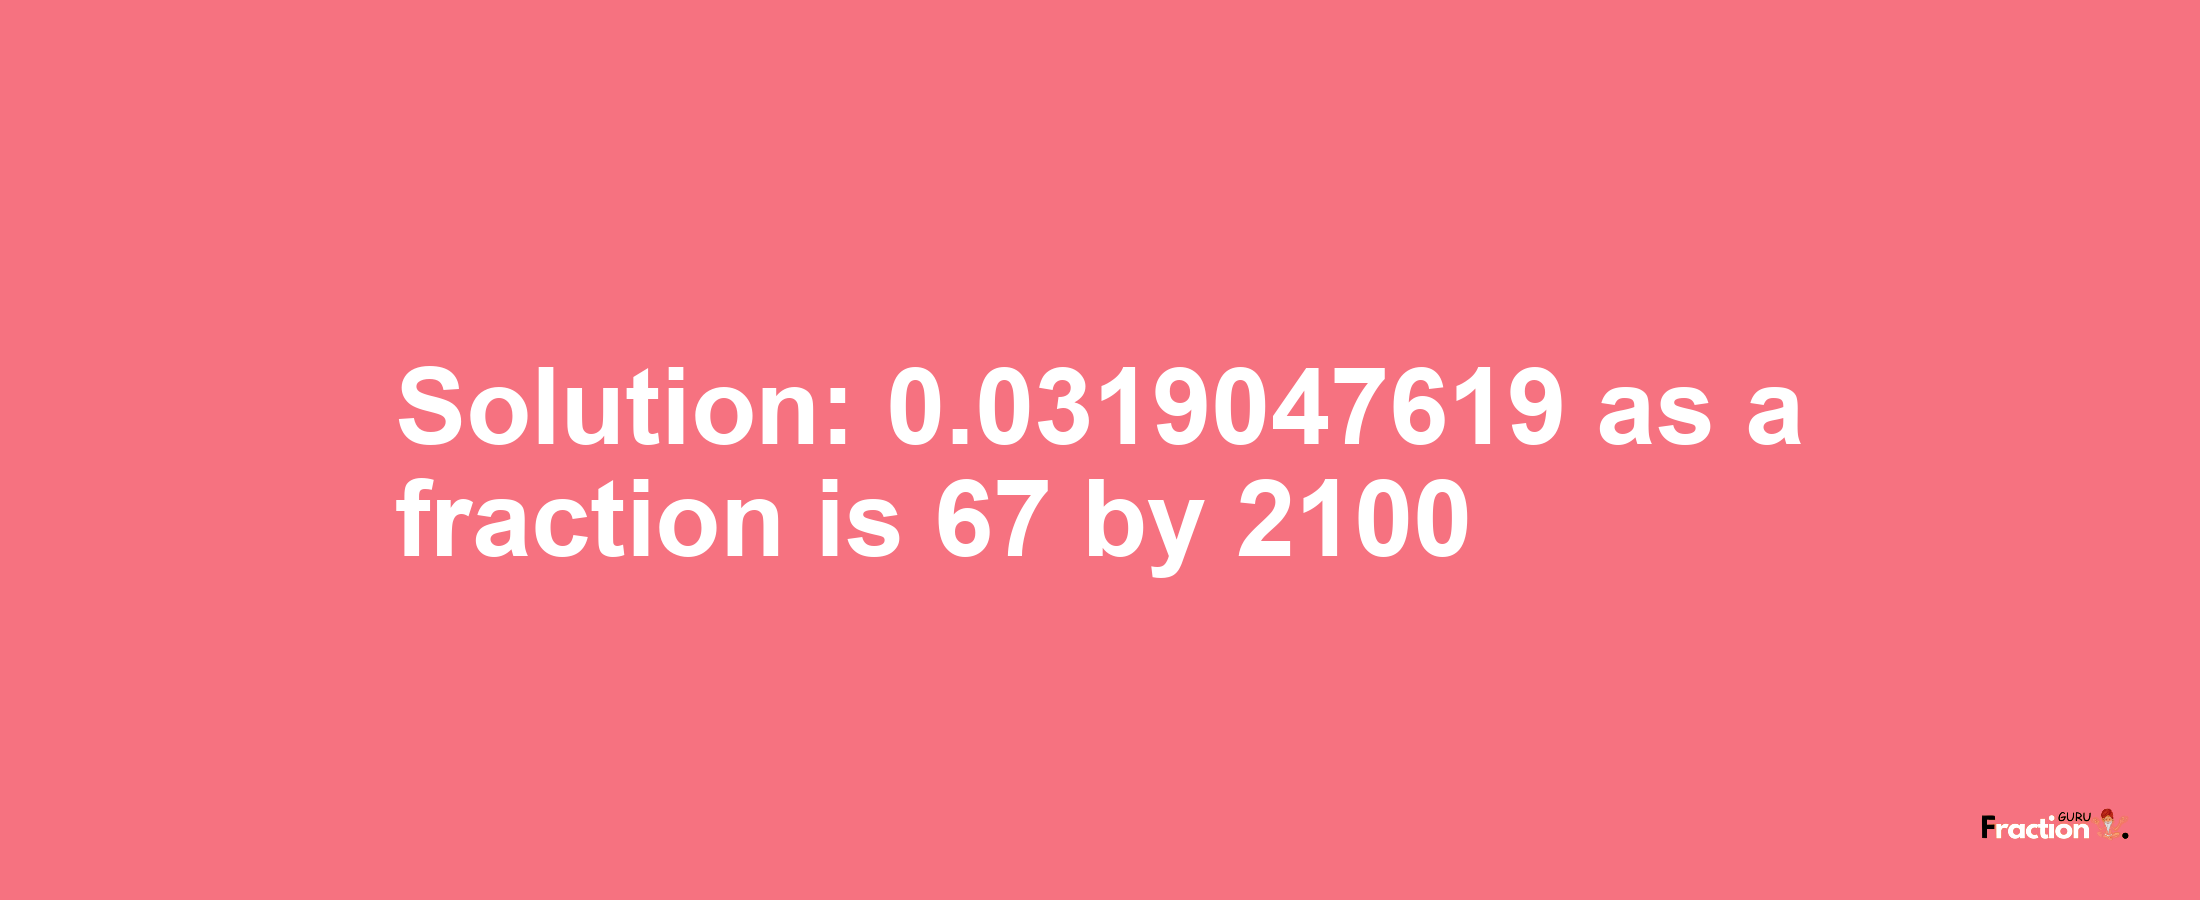 Solution:0.0319047619 as a fraction is 67/2100